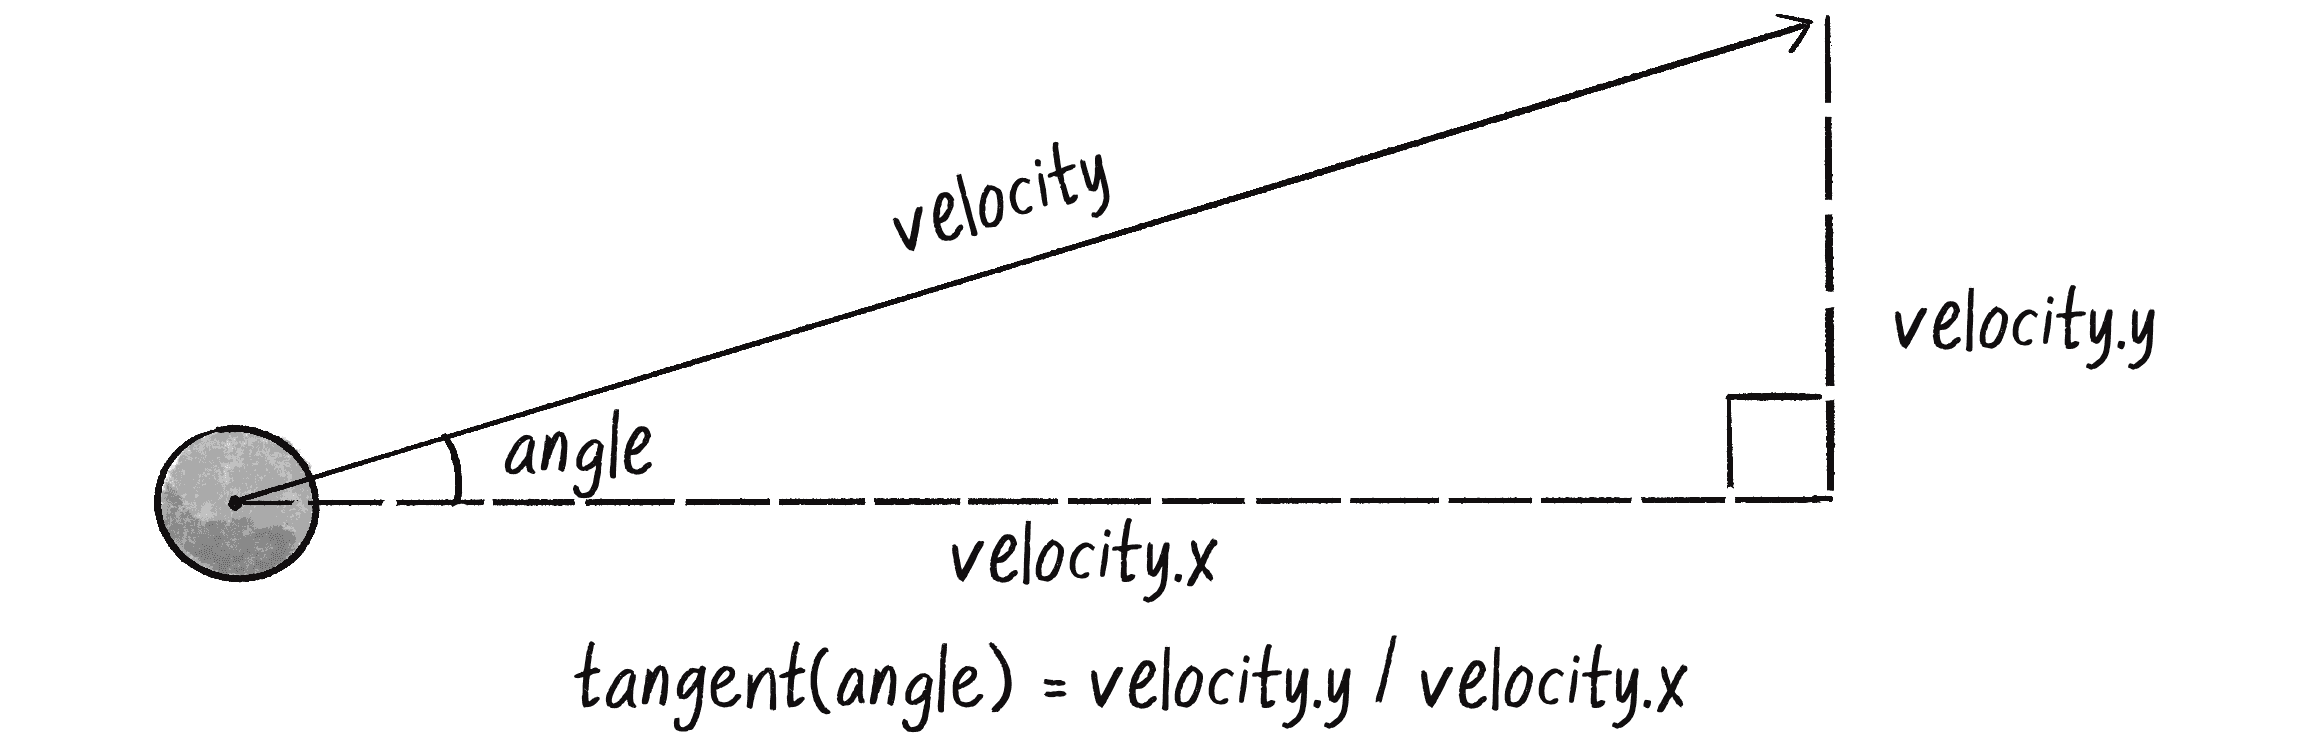 Figure 3.6: The tangent of a velocity vector’s angle is y divided by x.